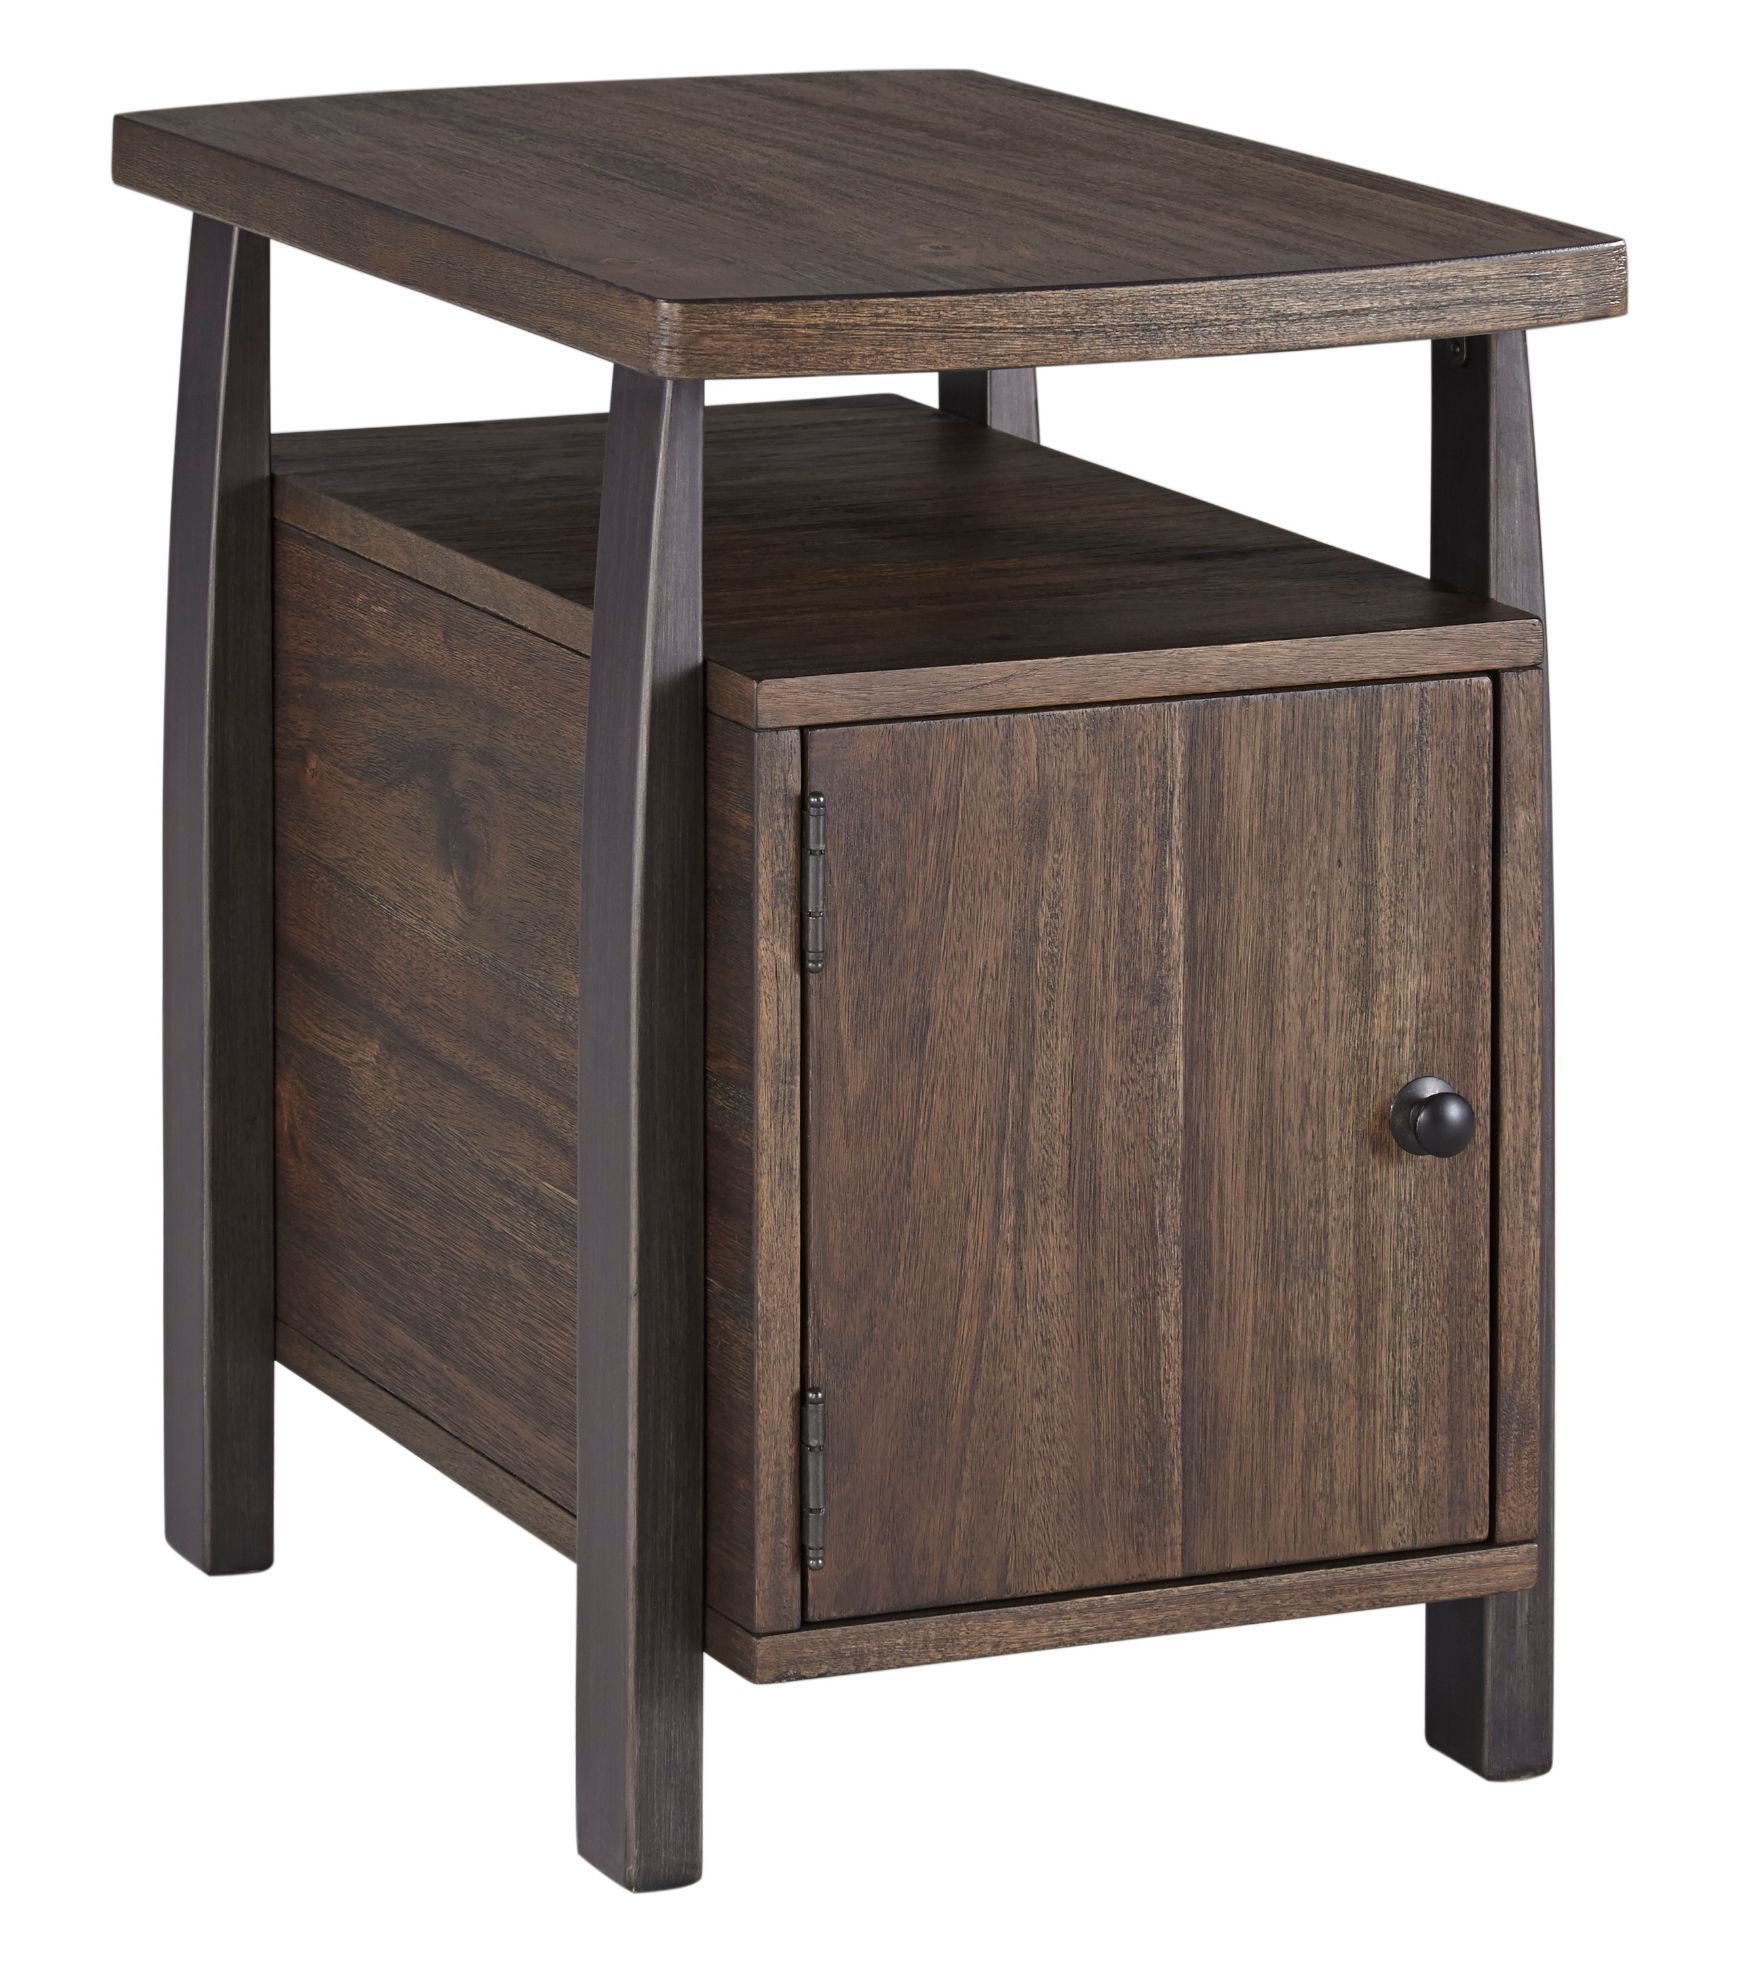 Vailbry Chairside Table